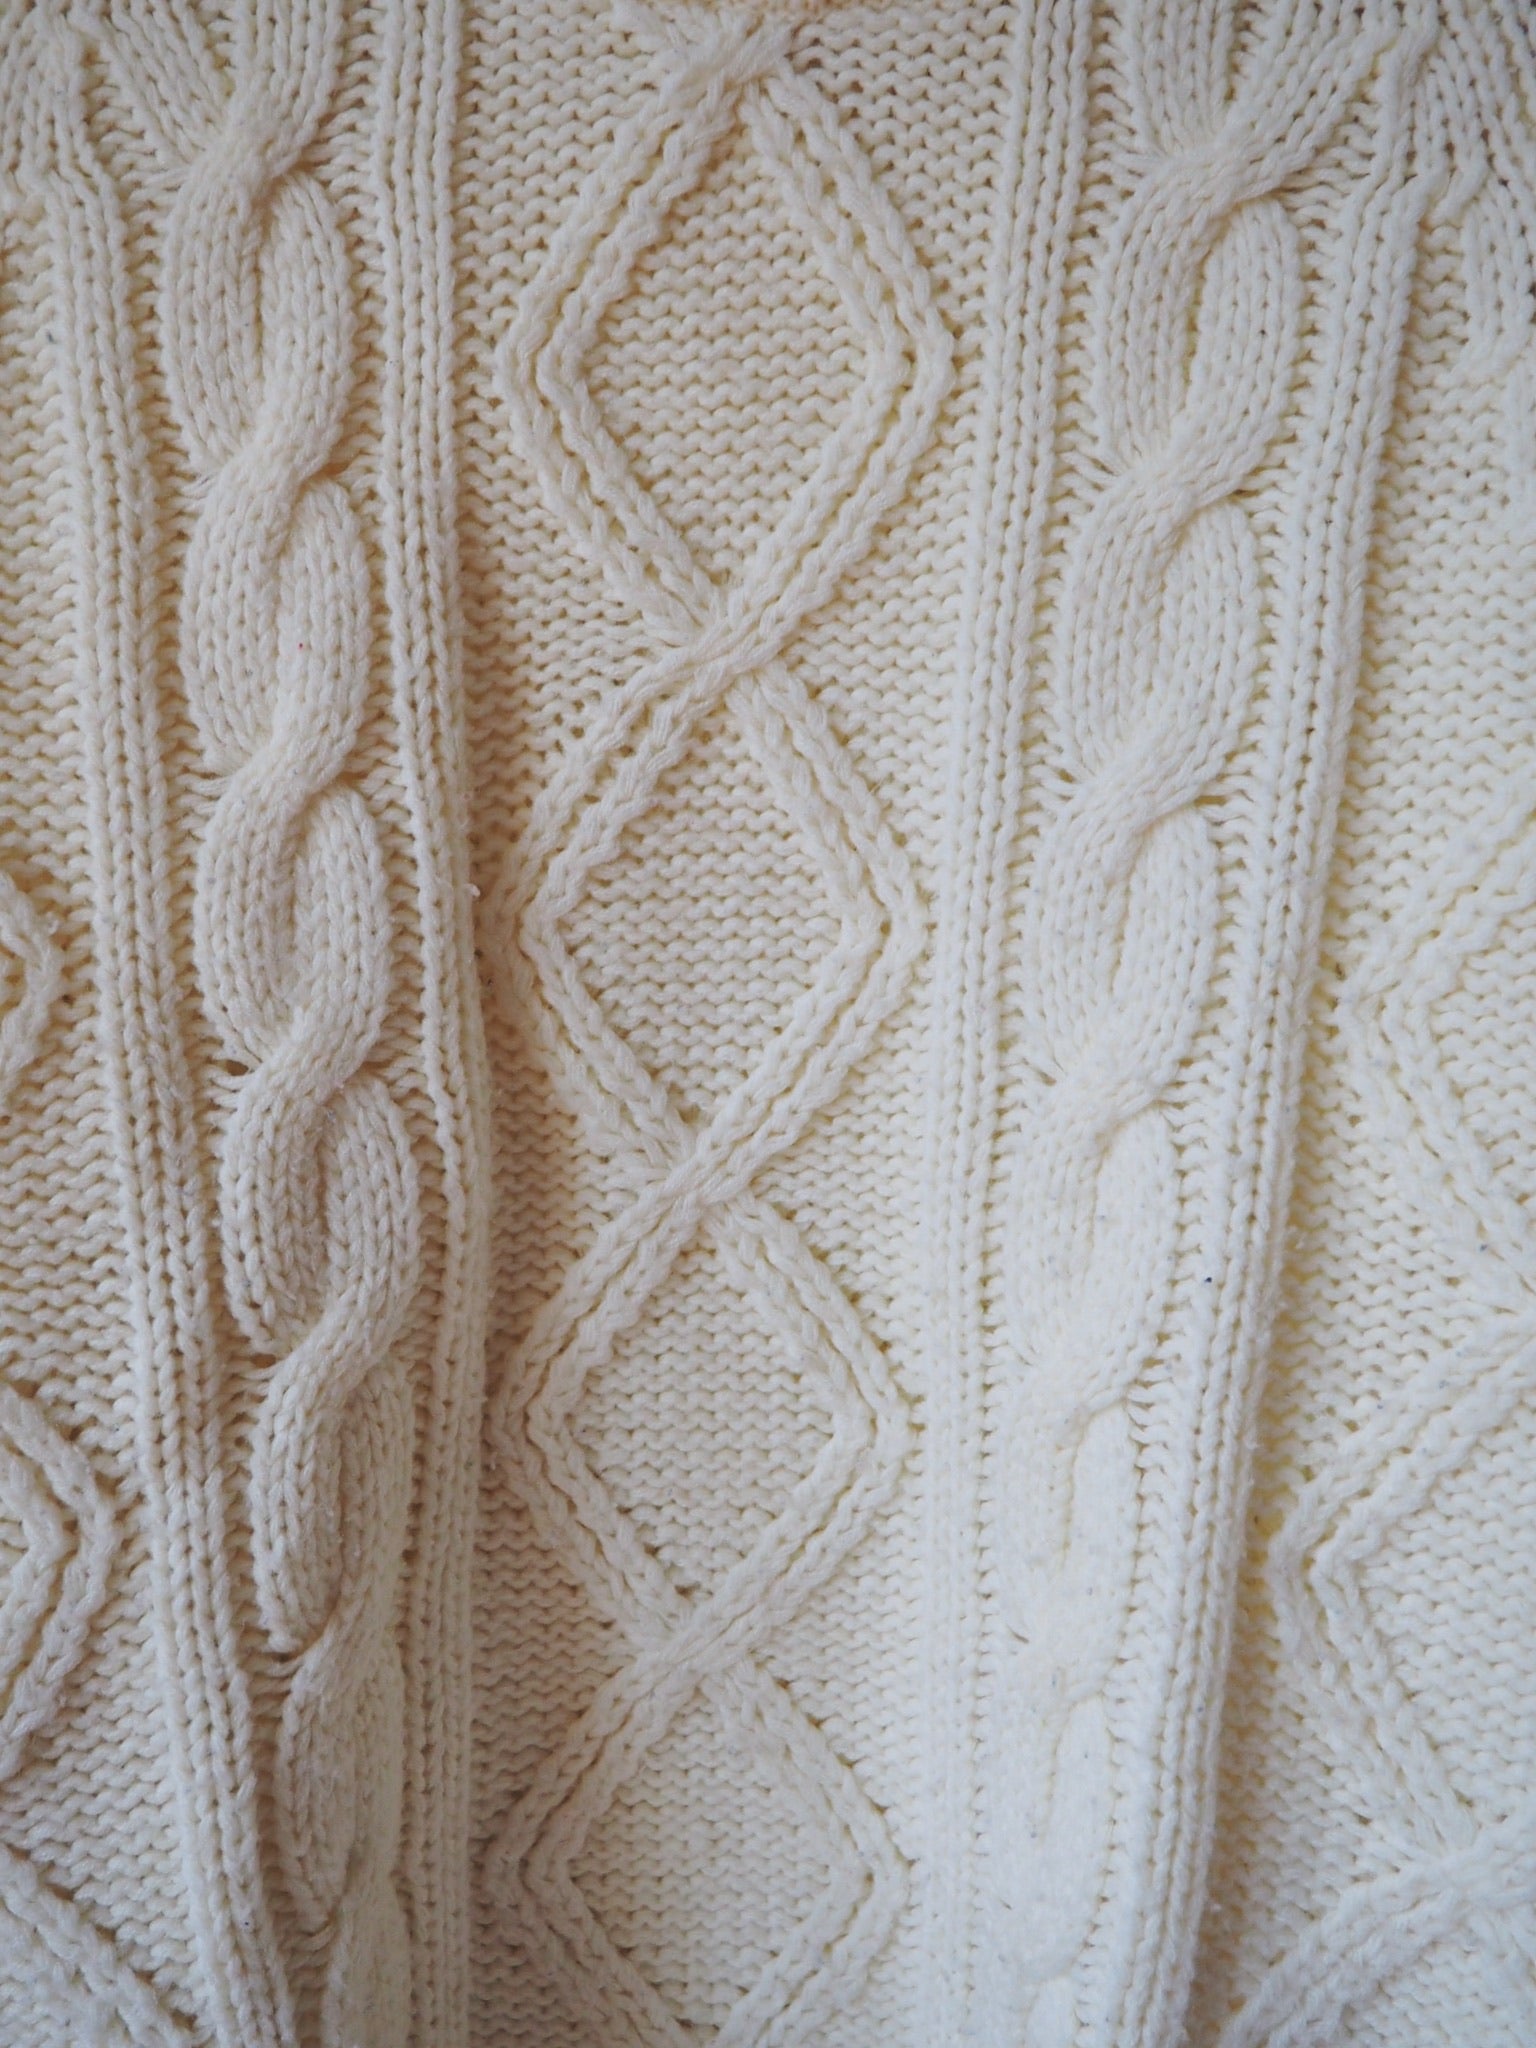 Vintage Cream Cableknit Sweater